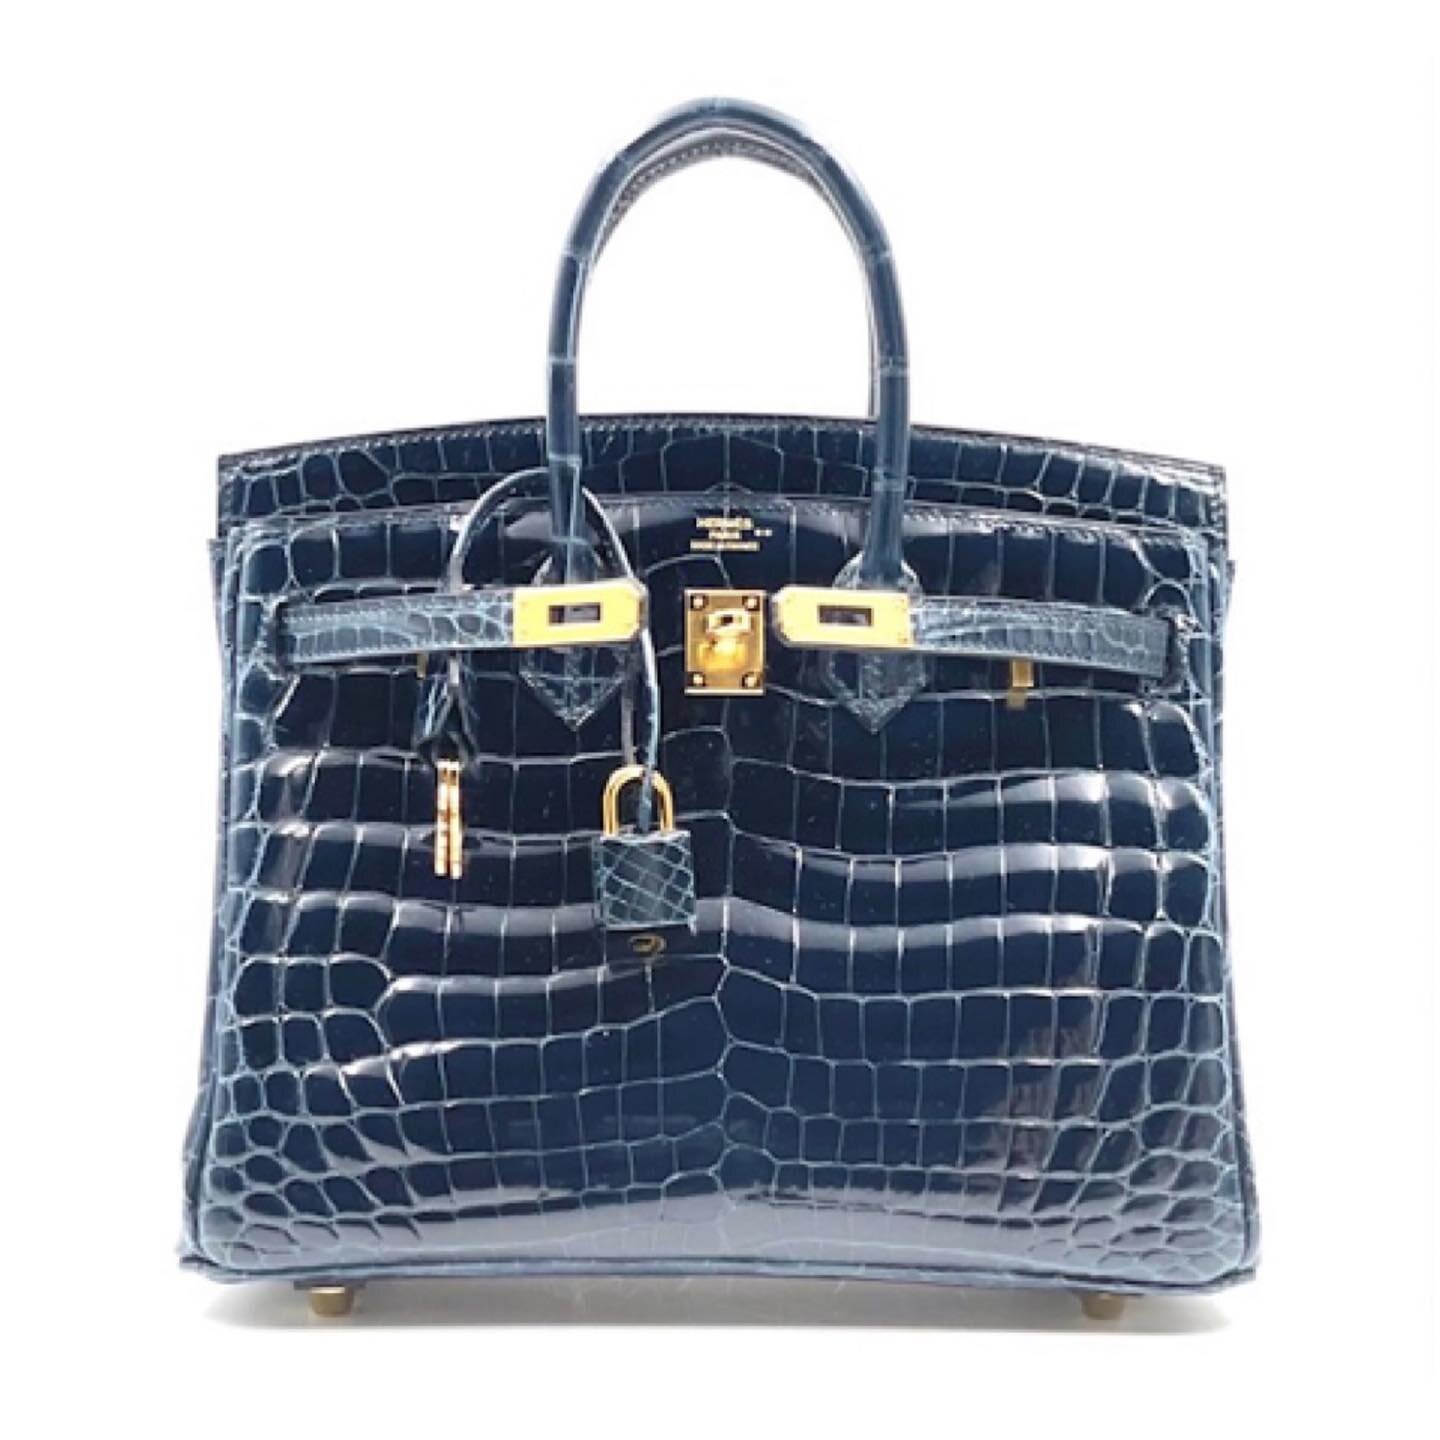 FOUND 💙 When Hermes offers us the most gorgeous Blue